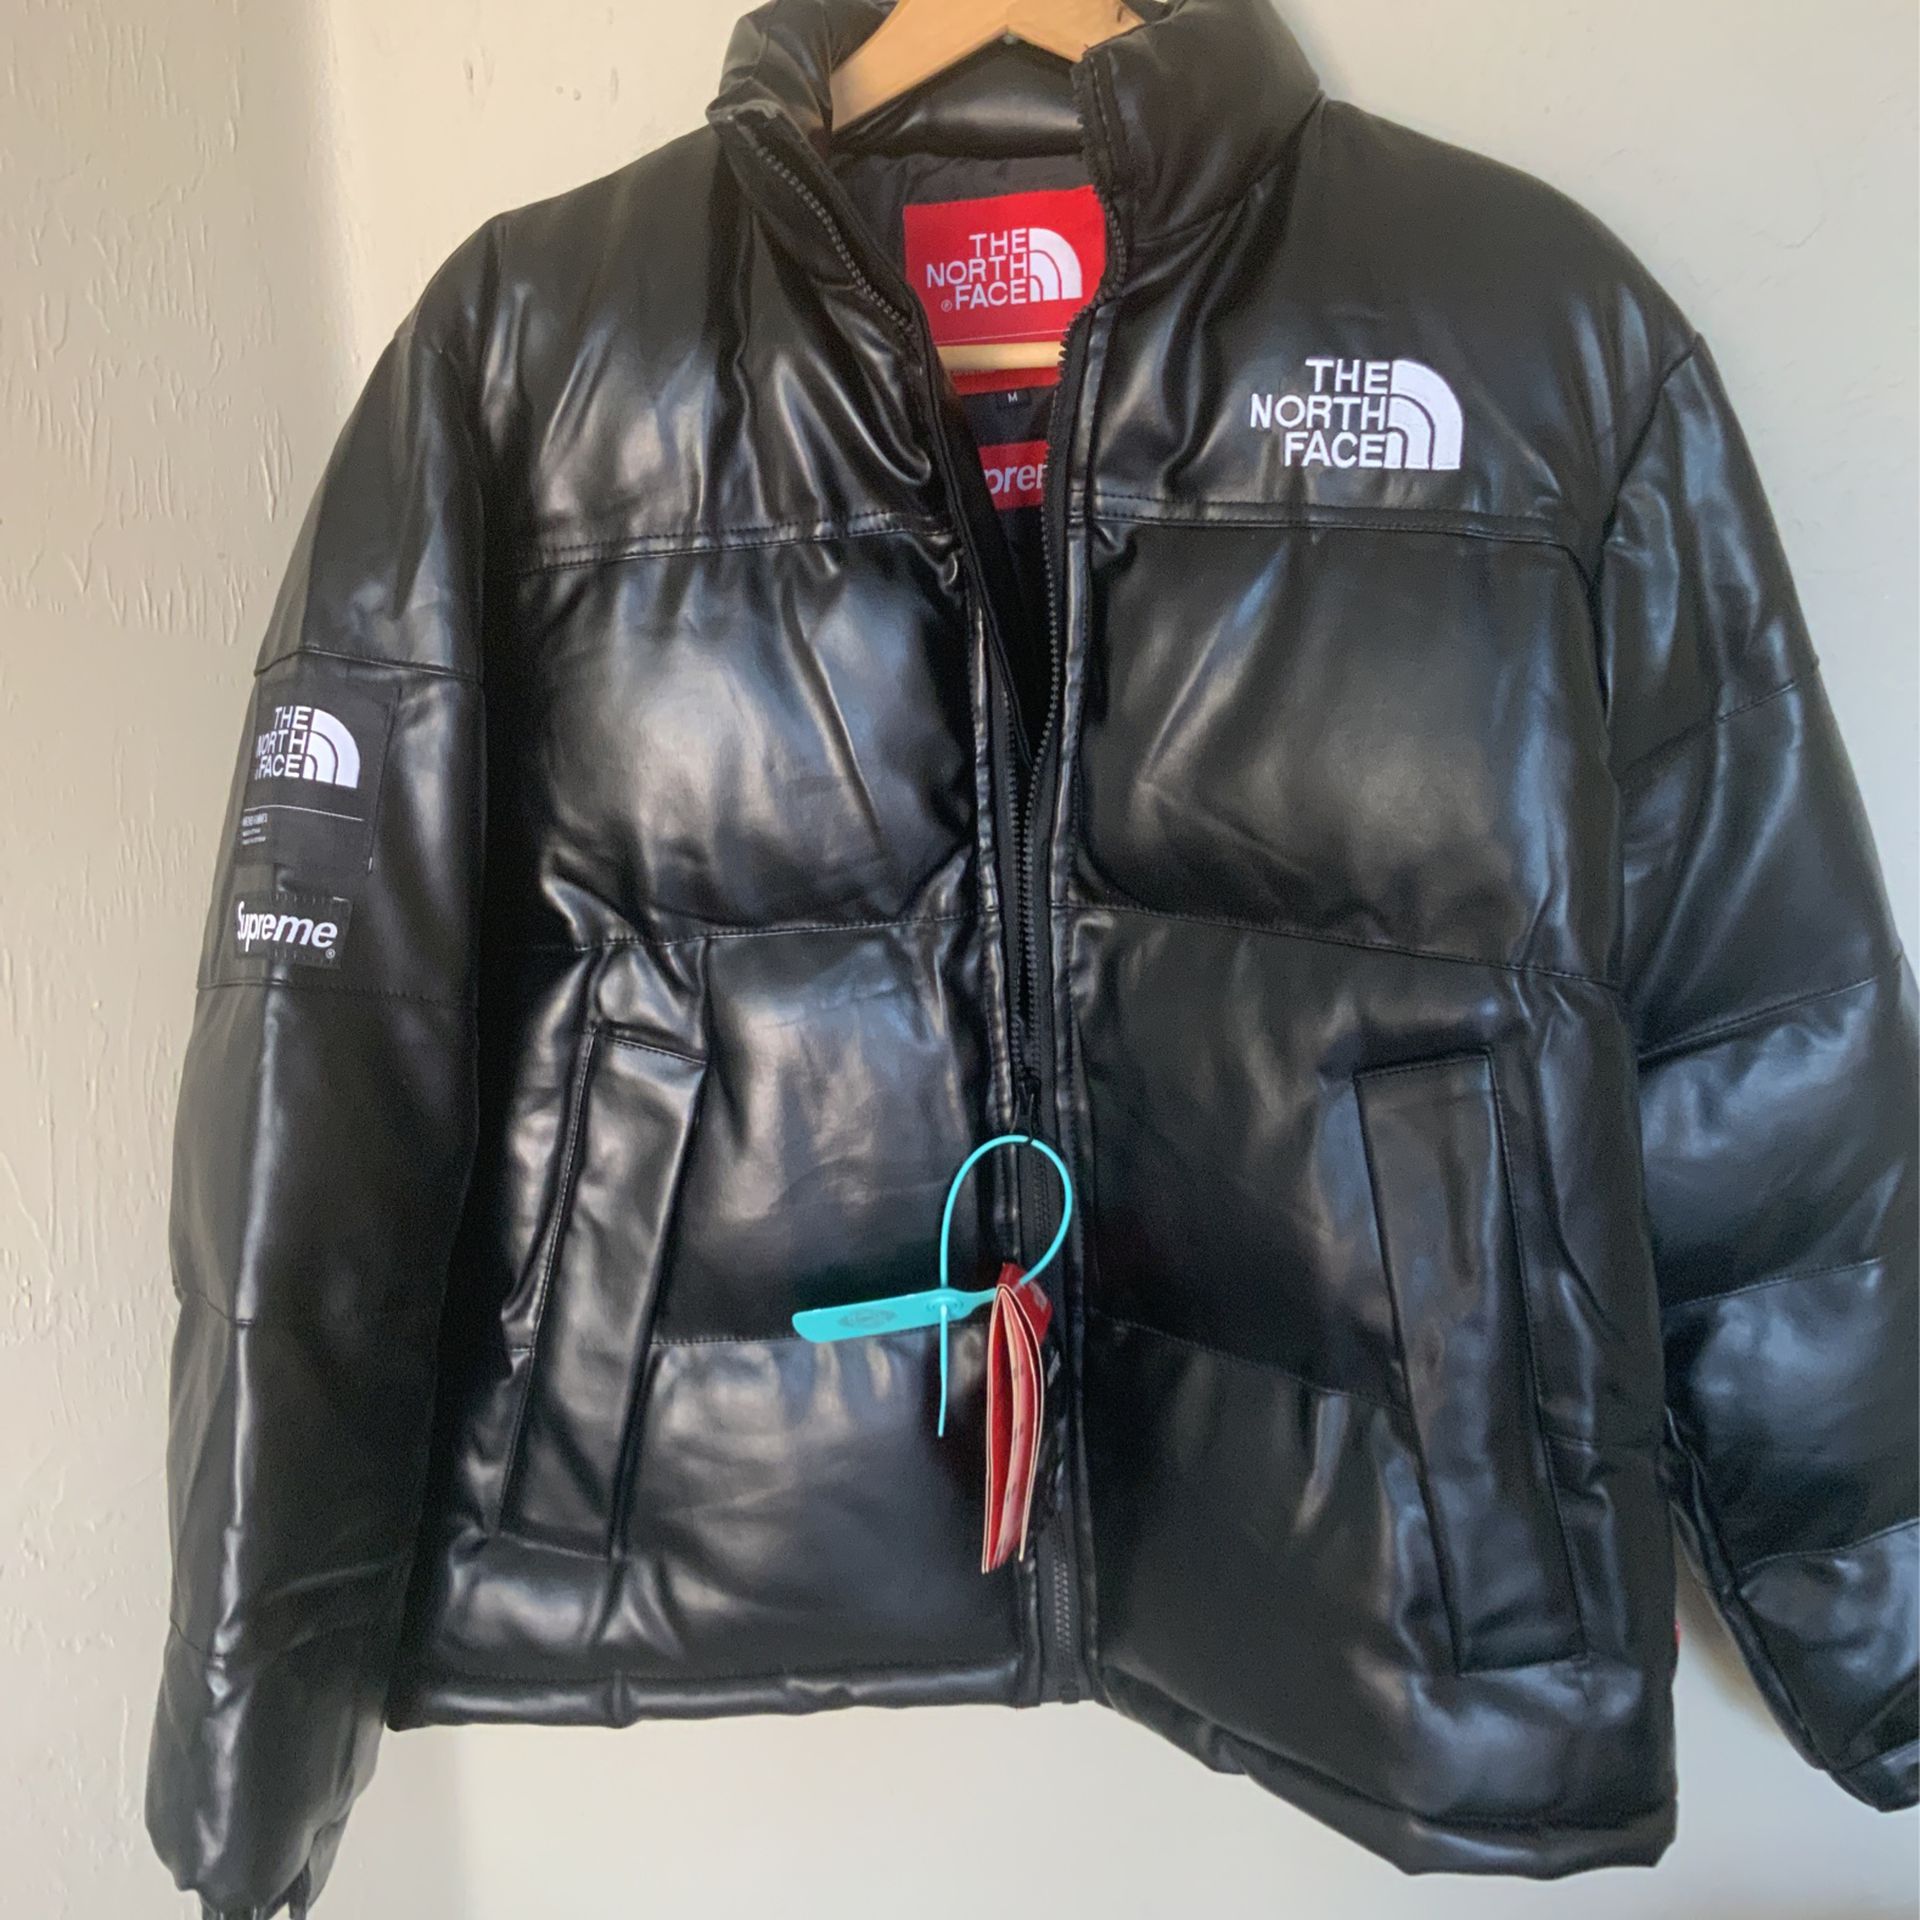 Mens Medium North Puffer Jacket New Tags Sale in Fort FL - OfferUp